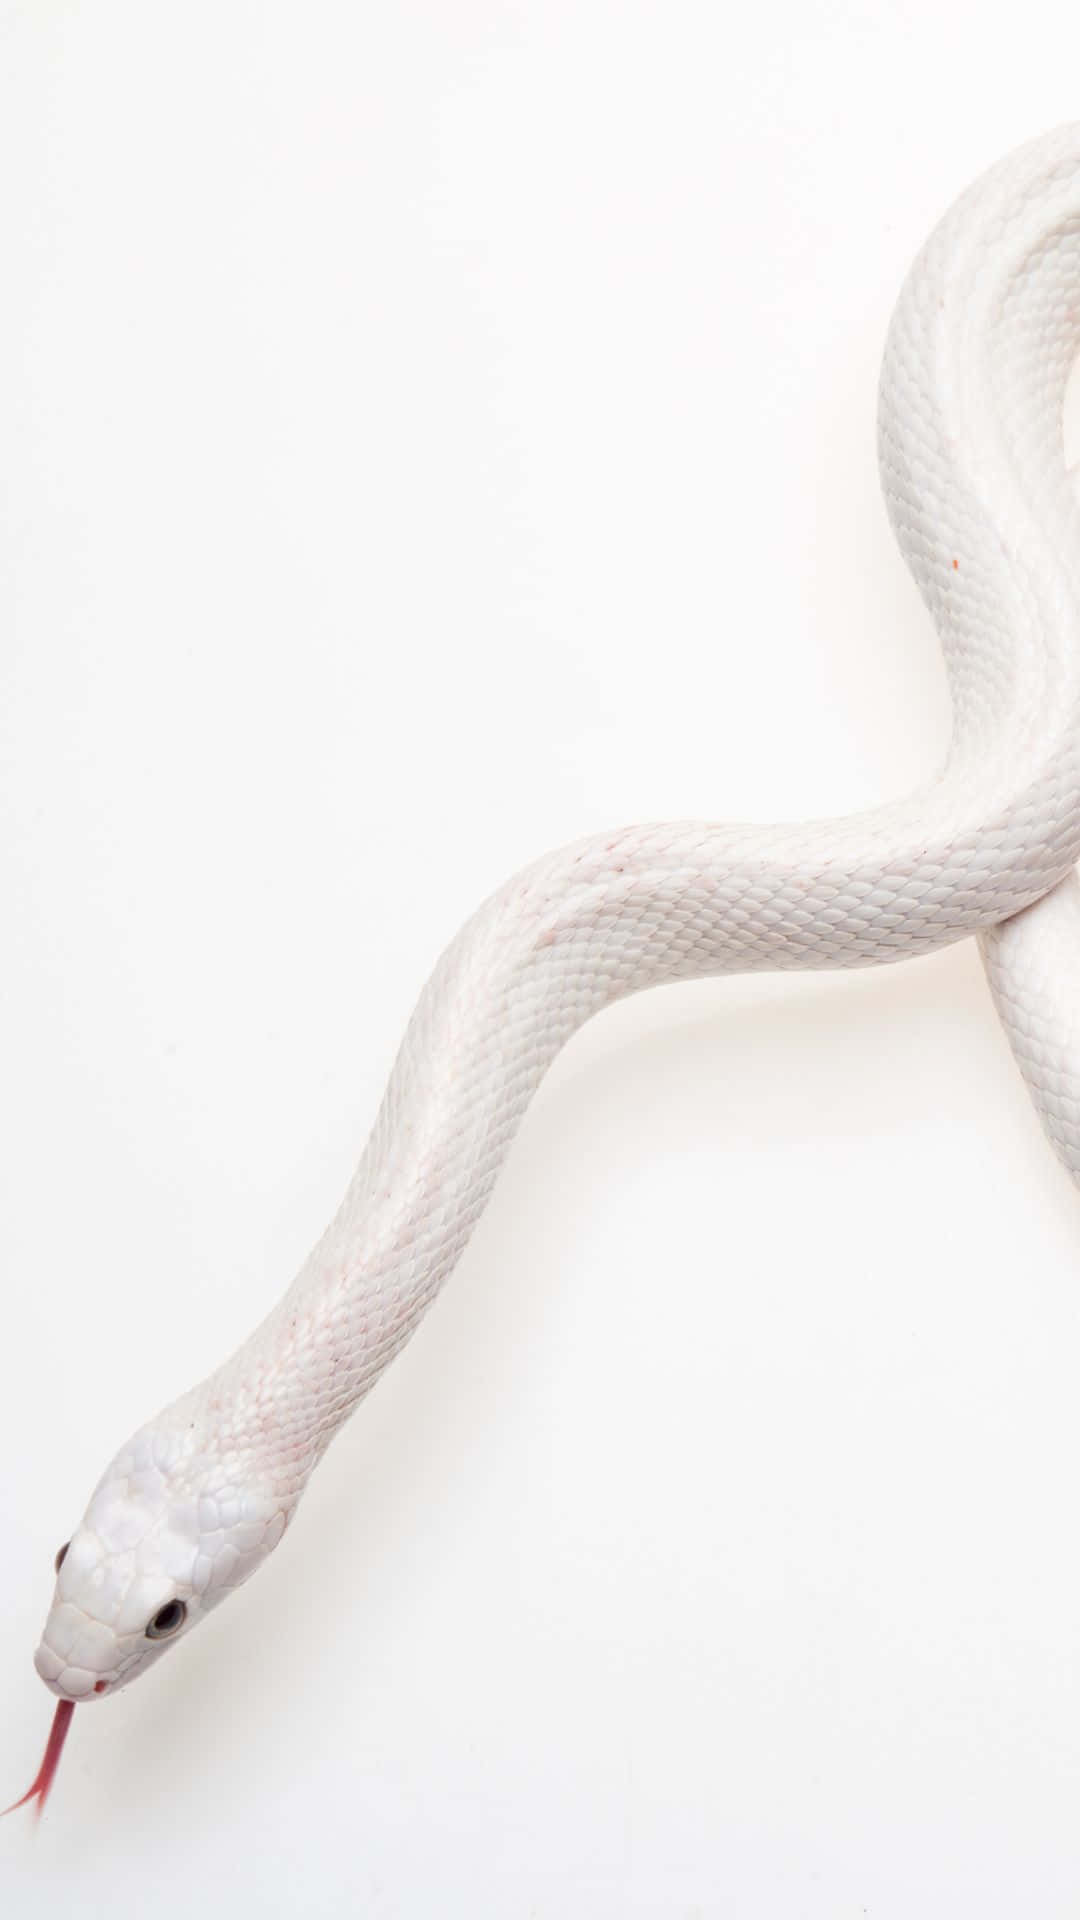 Cool Snake In Pure White Background